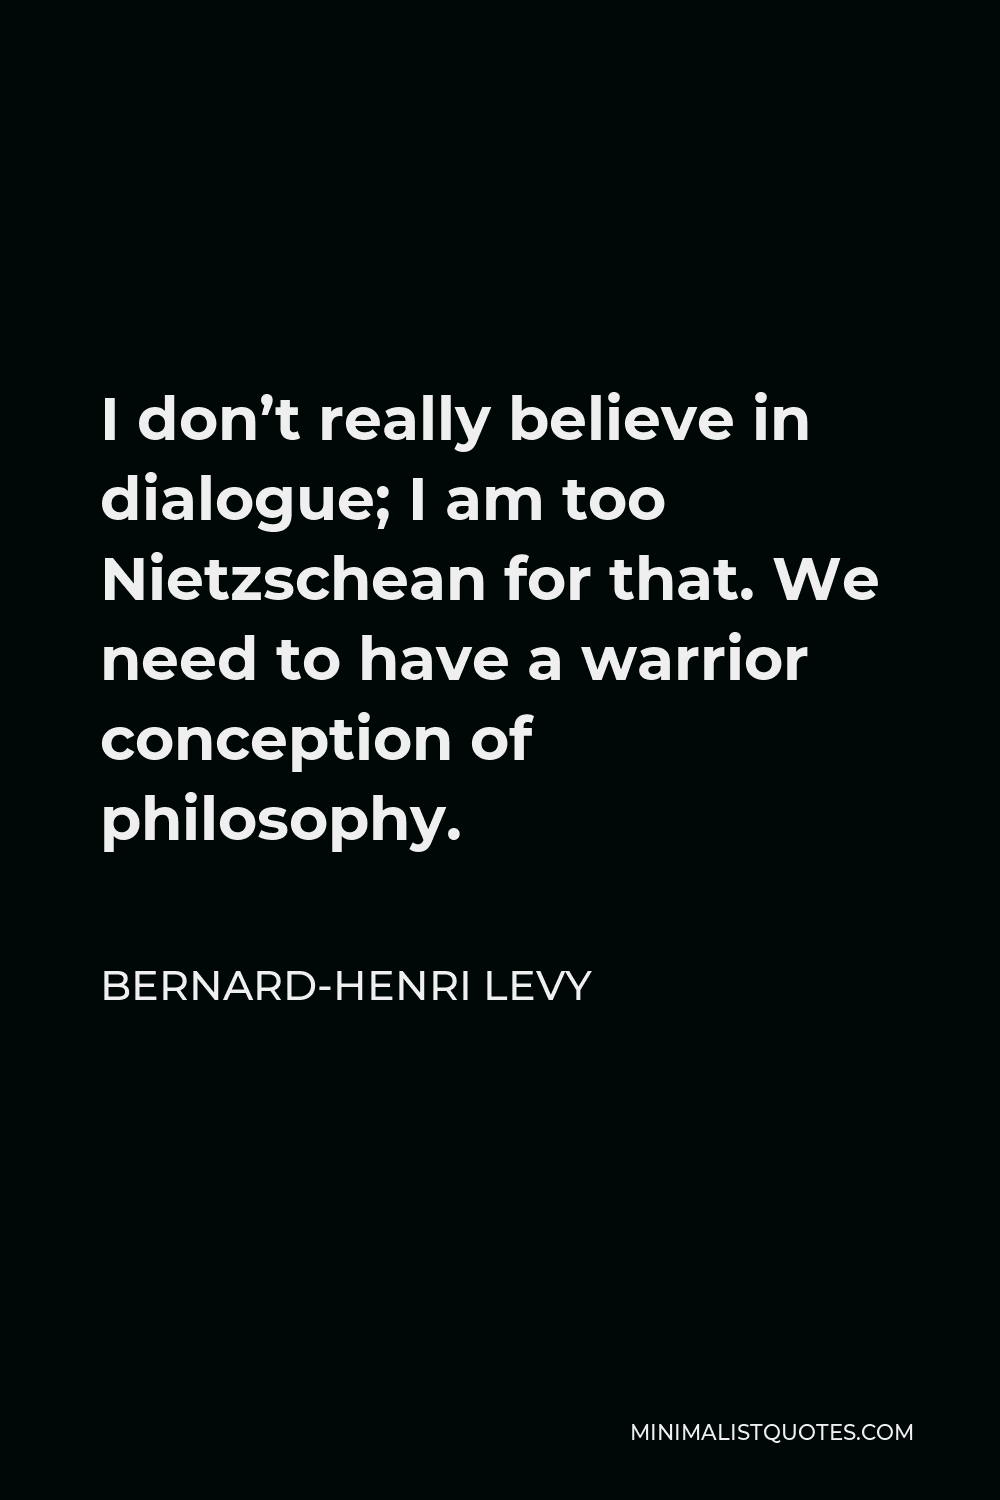 Bernard-Henri Levy Quote - I don’t really believe in dialogue; I am too Nietzschean for that. We need to have a warrior conception of philosophy.